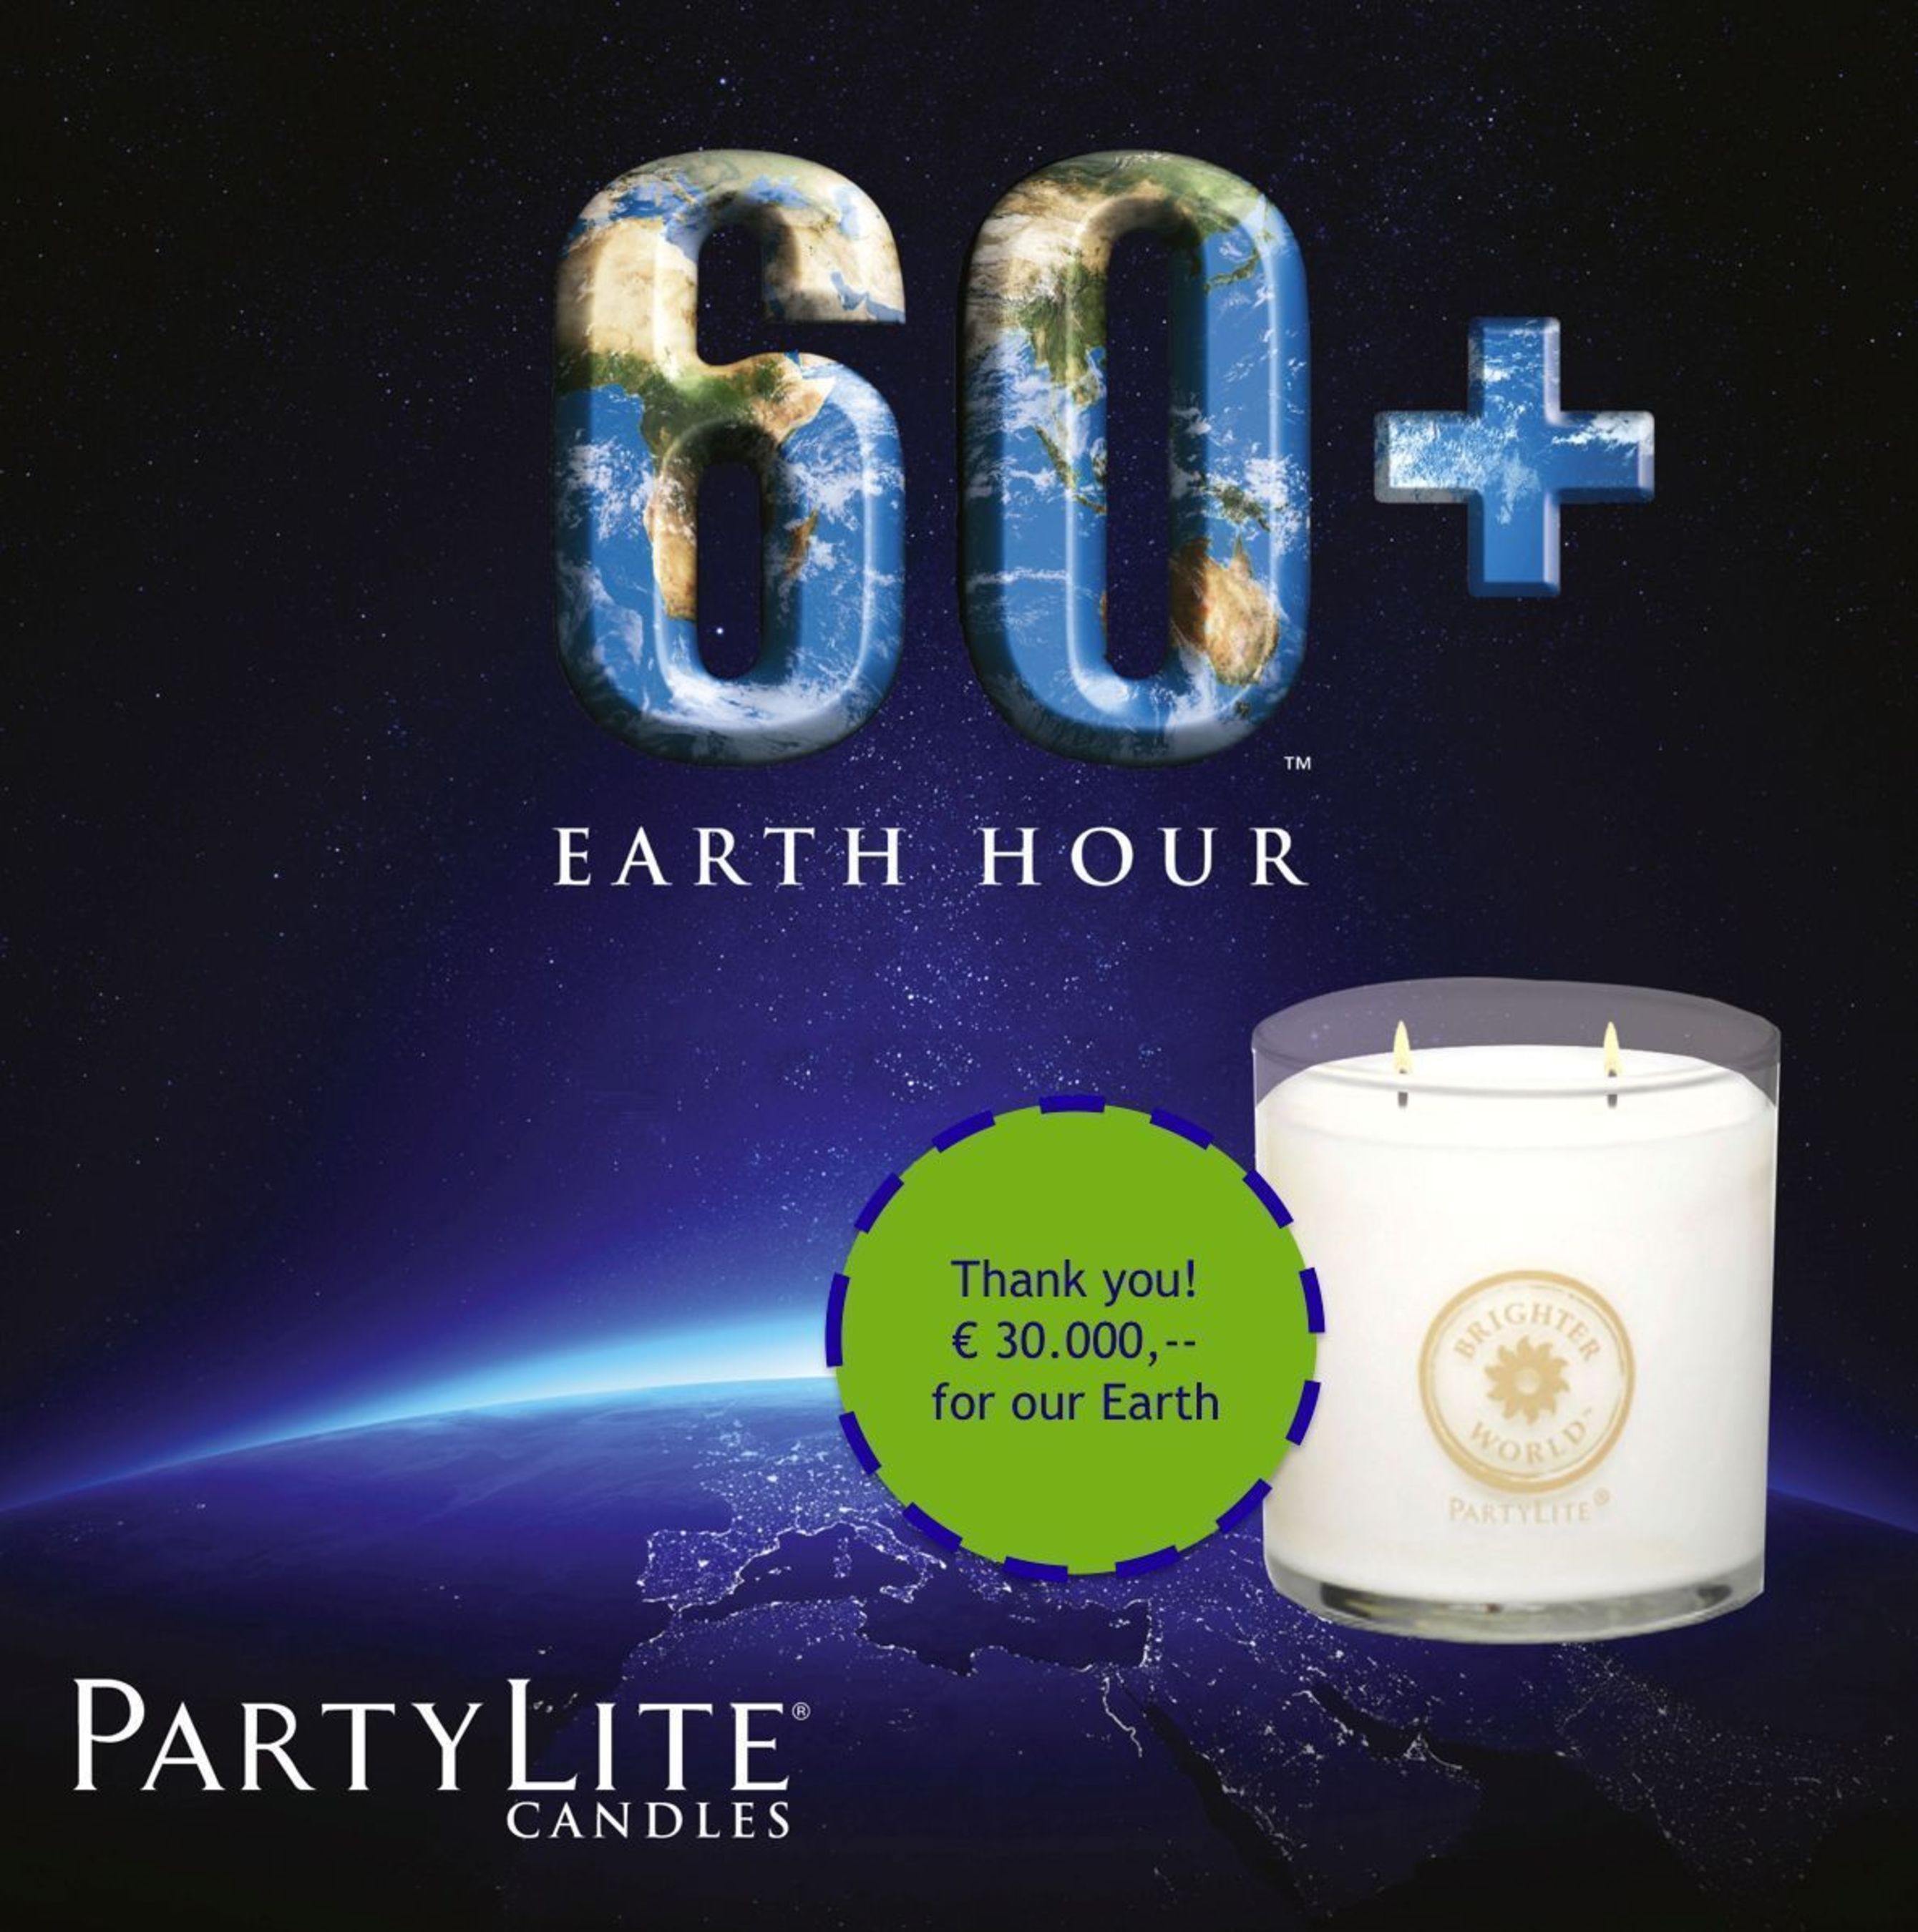 PartyLite Donates close to EUR 30,000 to the Global Earth Hour Movement from 10,000 Parties (PRNewsFoto/PartyLite)